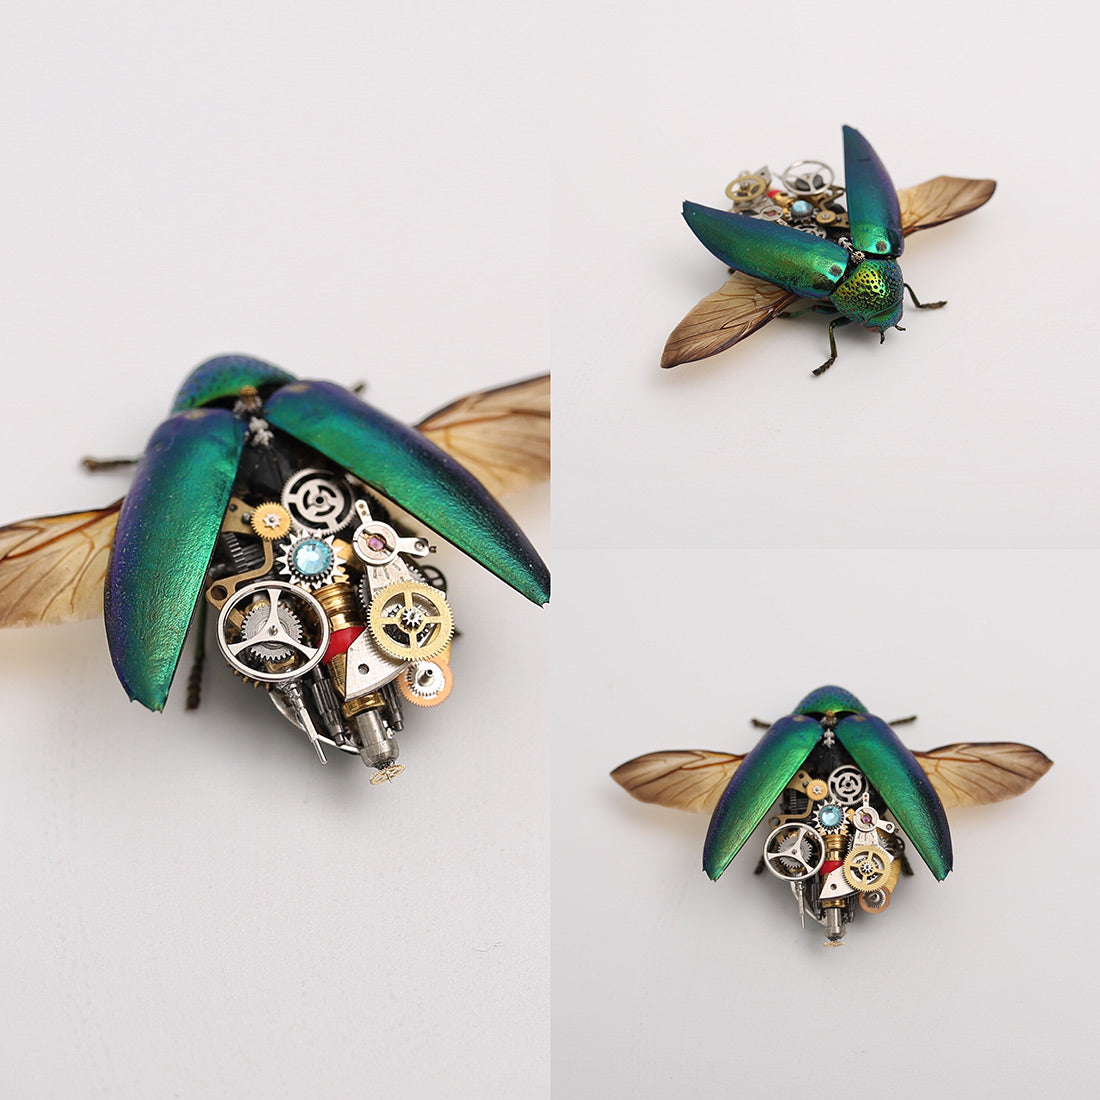 Steampunk Shiny Green Jewel Beetle Bug Insect Gothic Model with Frame